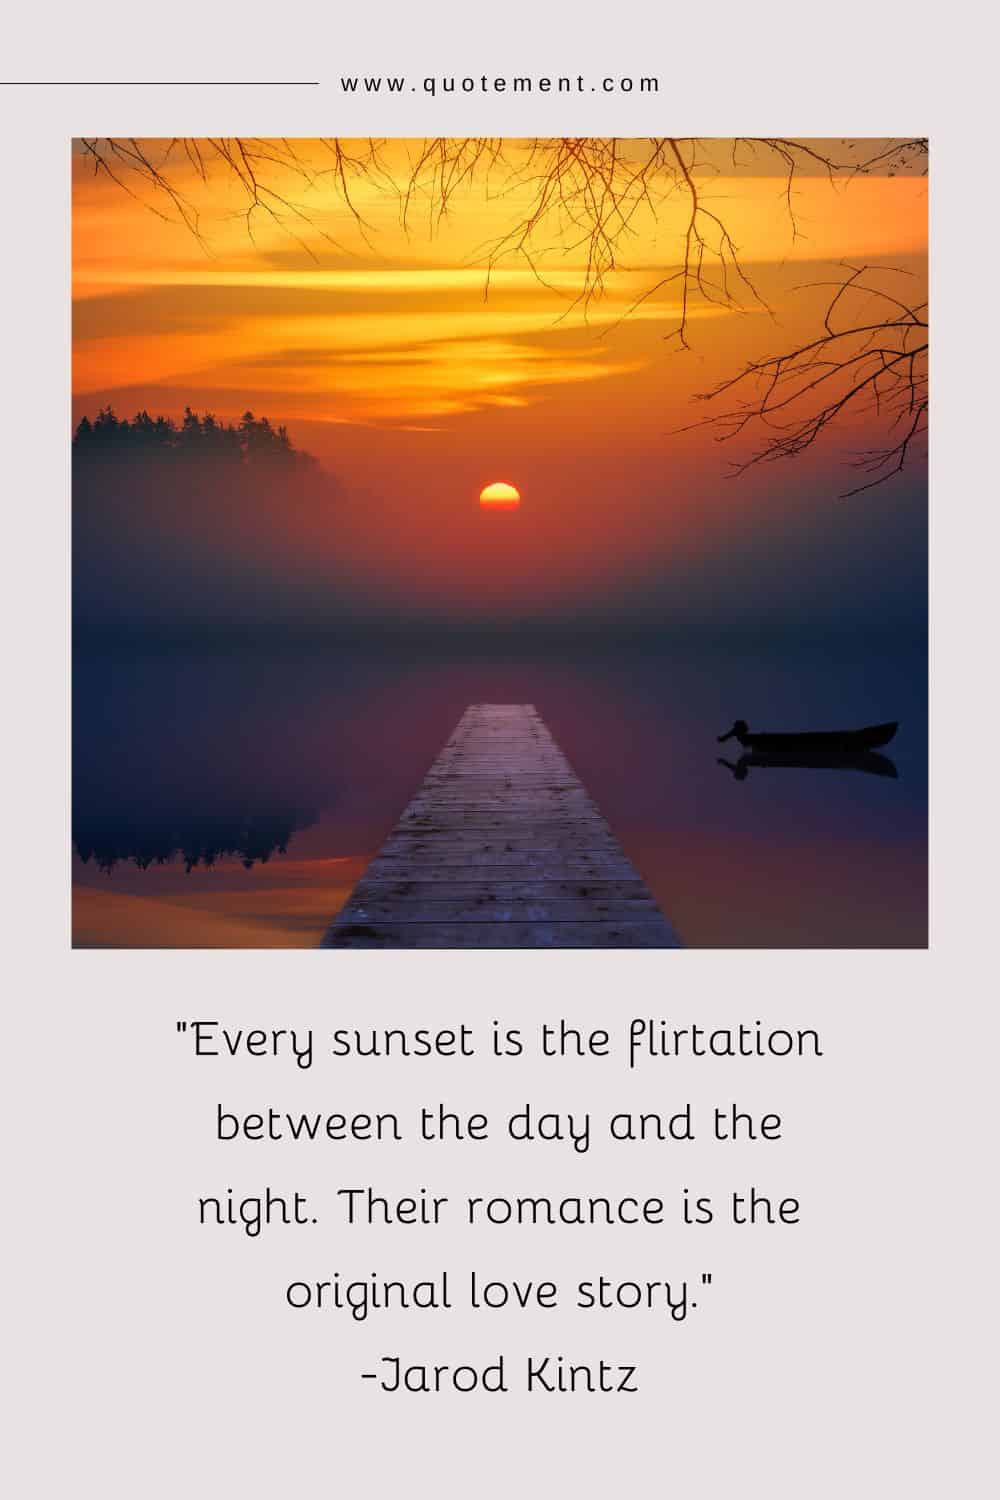 Every sunset is the flirtation between the day and the night. Their romance is the original love story